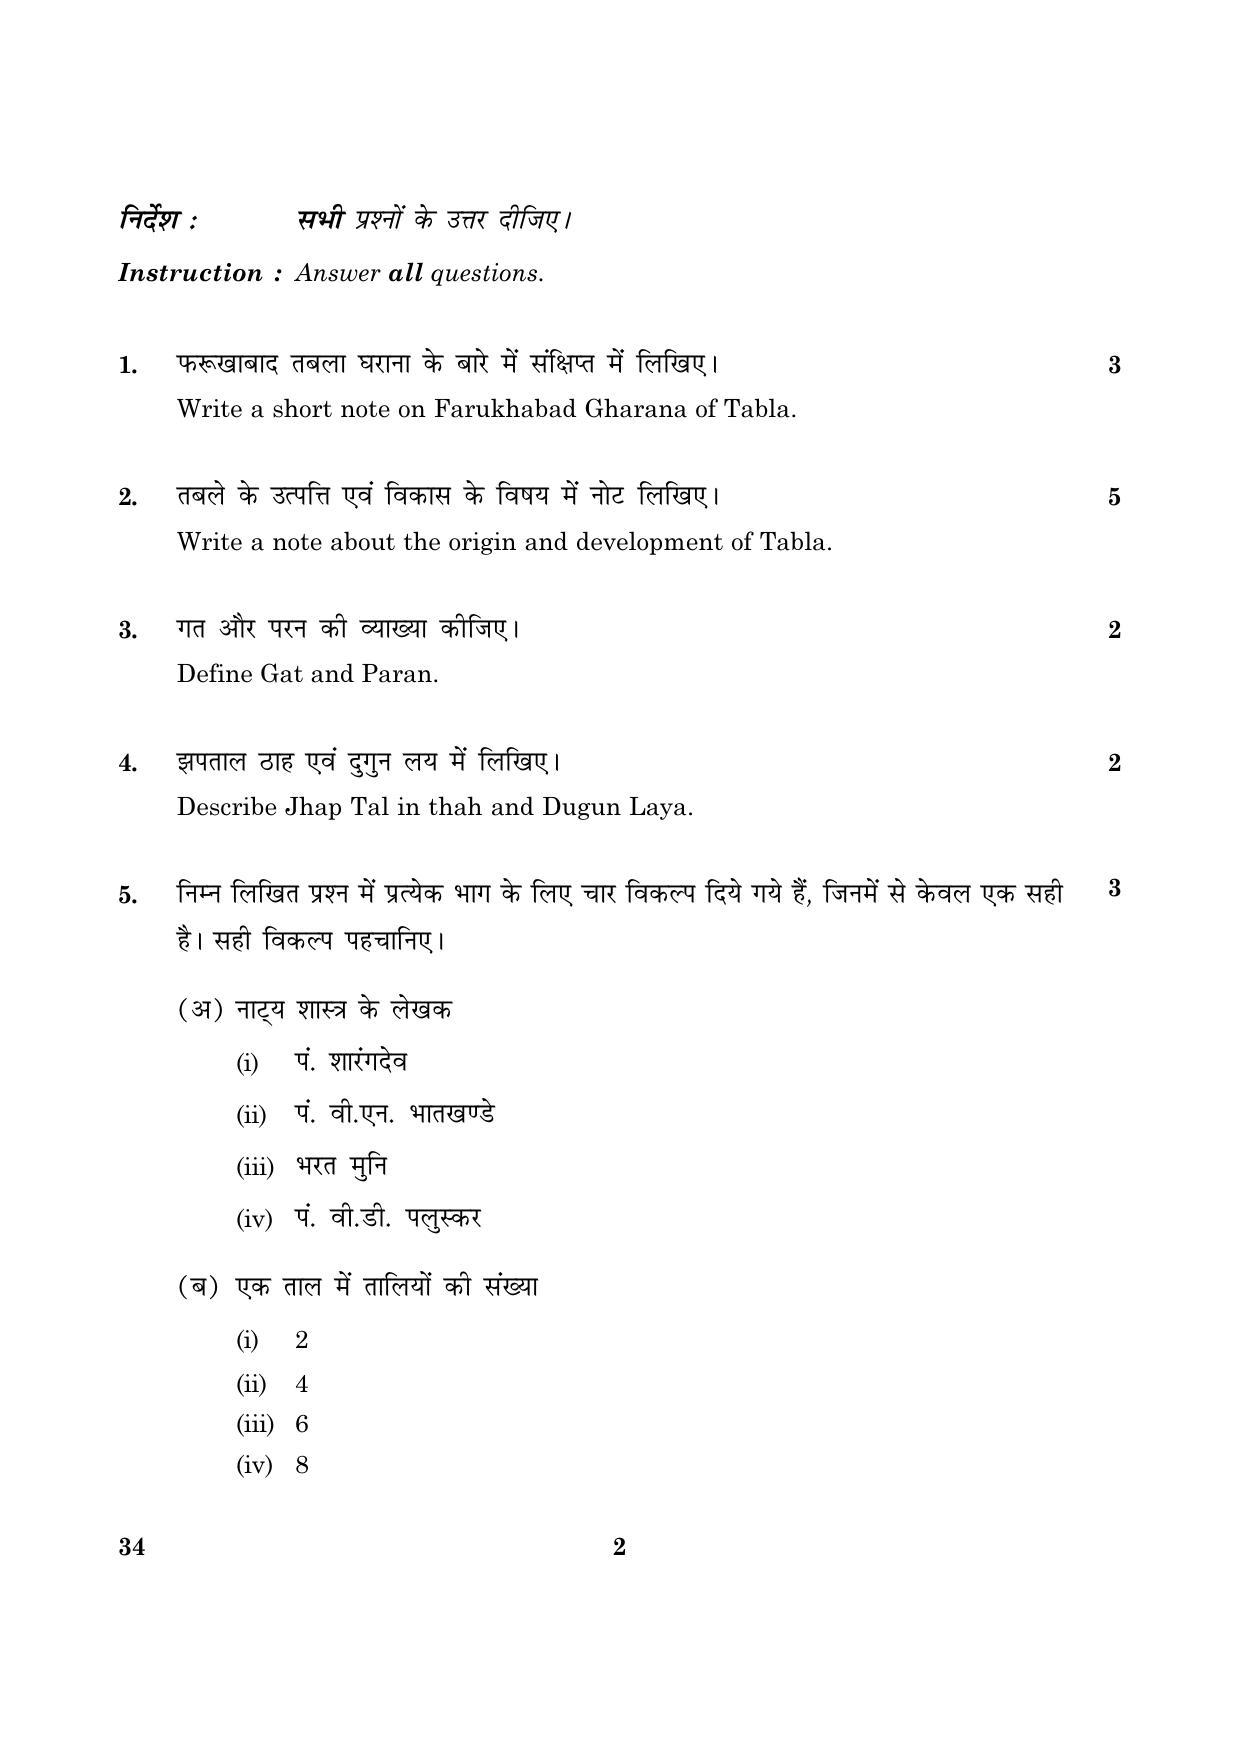 CBSE Class 10 034 Hindustani Music 2016 Question Paper - Page 2